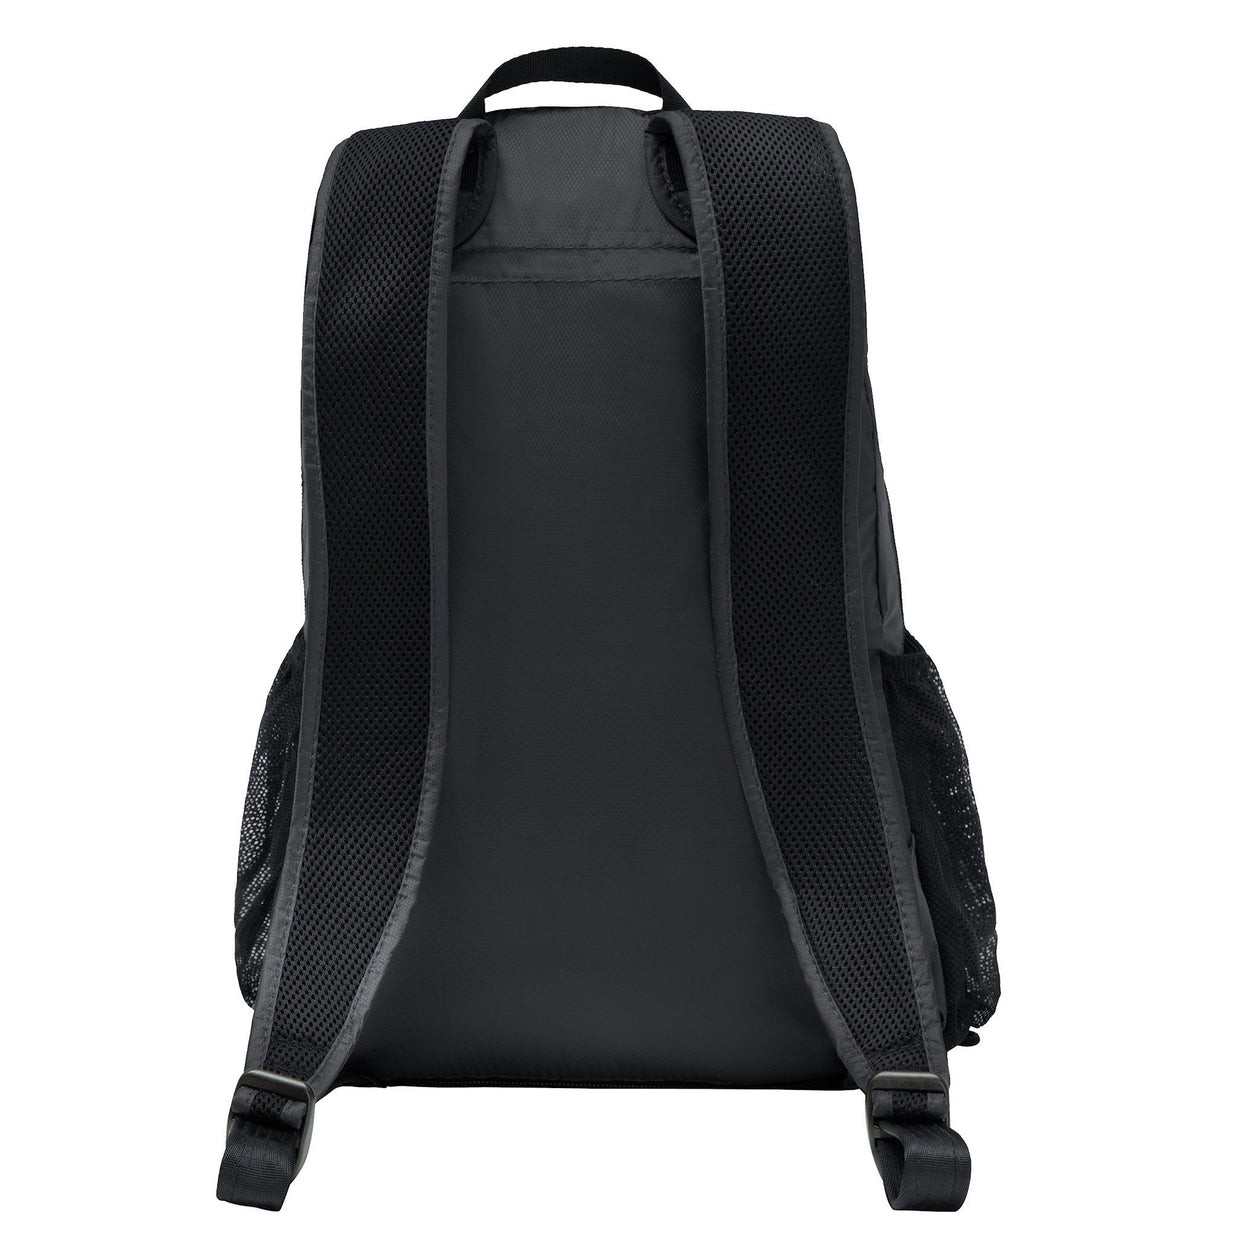 AAA.com l Anti-Theft Active Packable Backpack